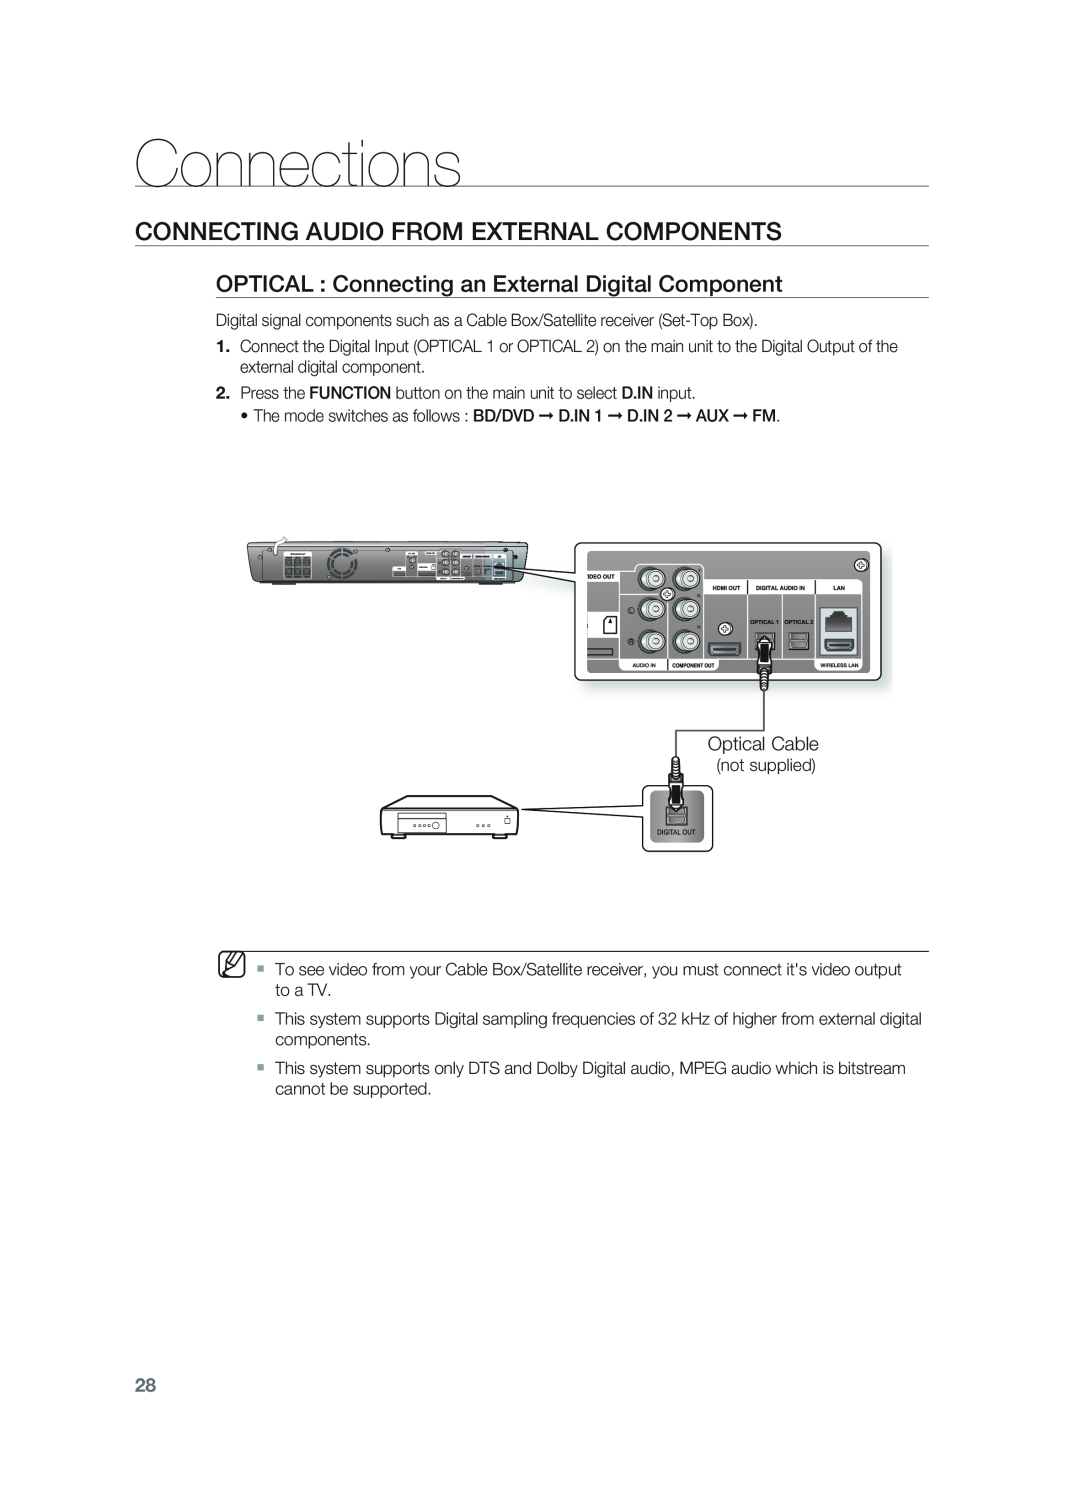 Samsung HT-BD1255, HT-BD1252 user manual Connecting Audio From External Components, Connections, Optical Cable 